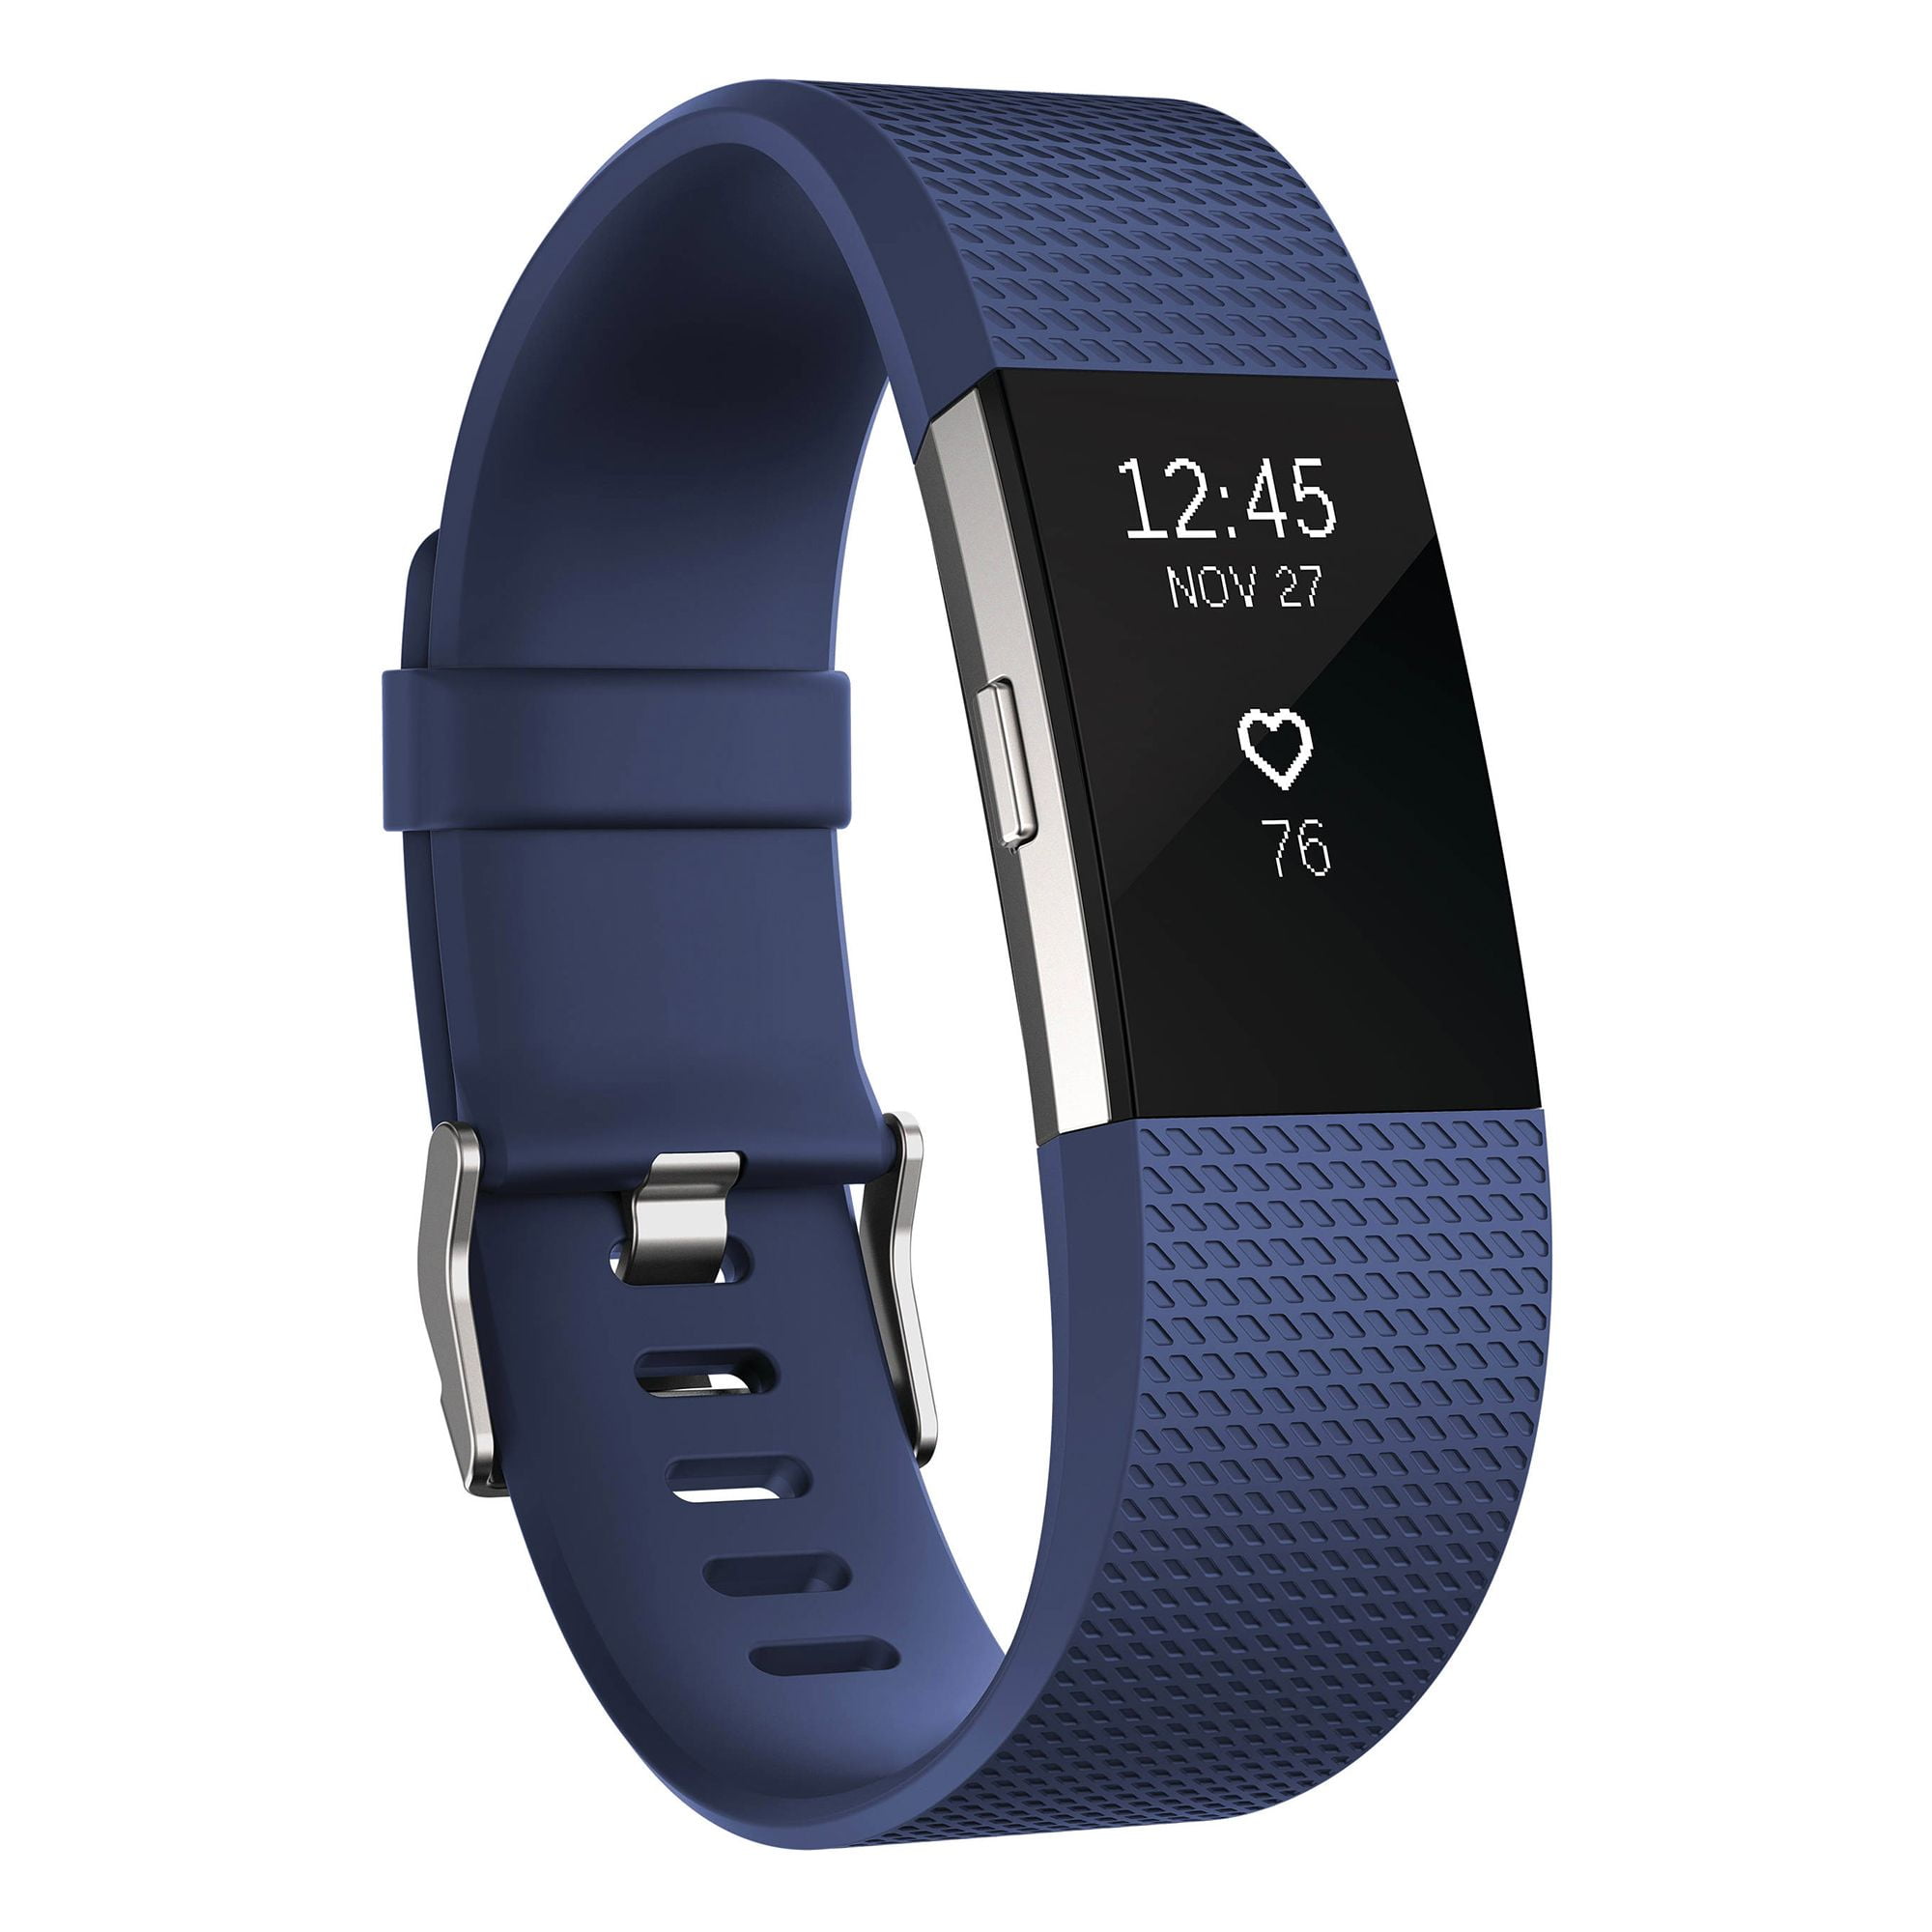 Fitbit Charge 2 Bands and Fitbit Charge 